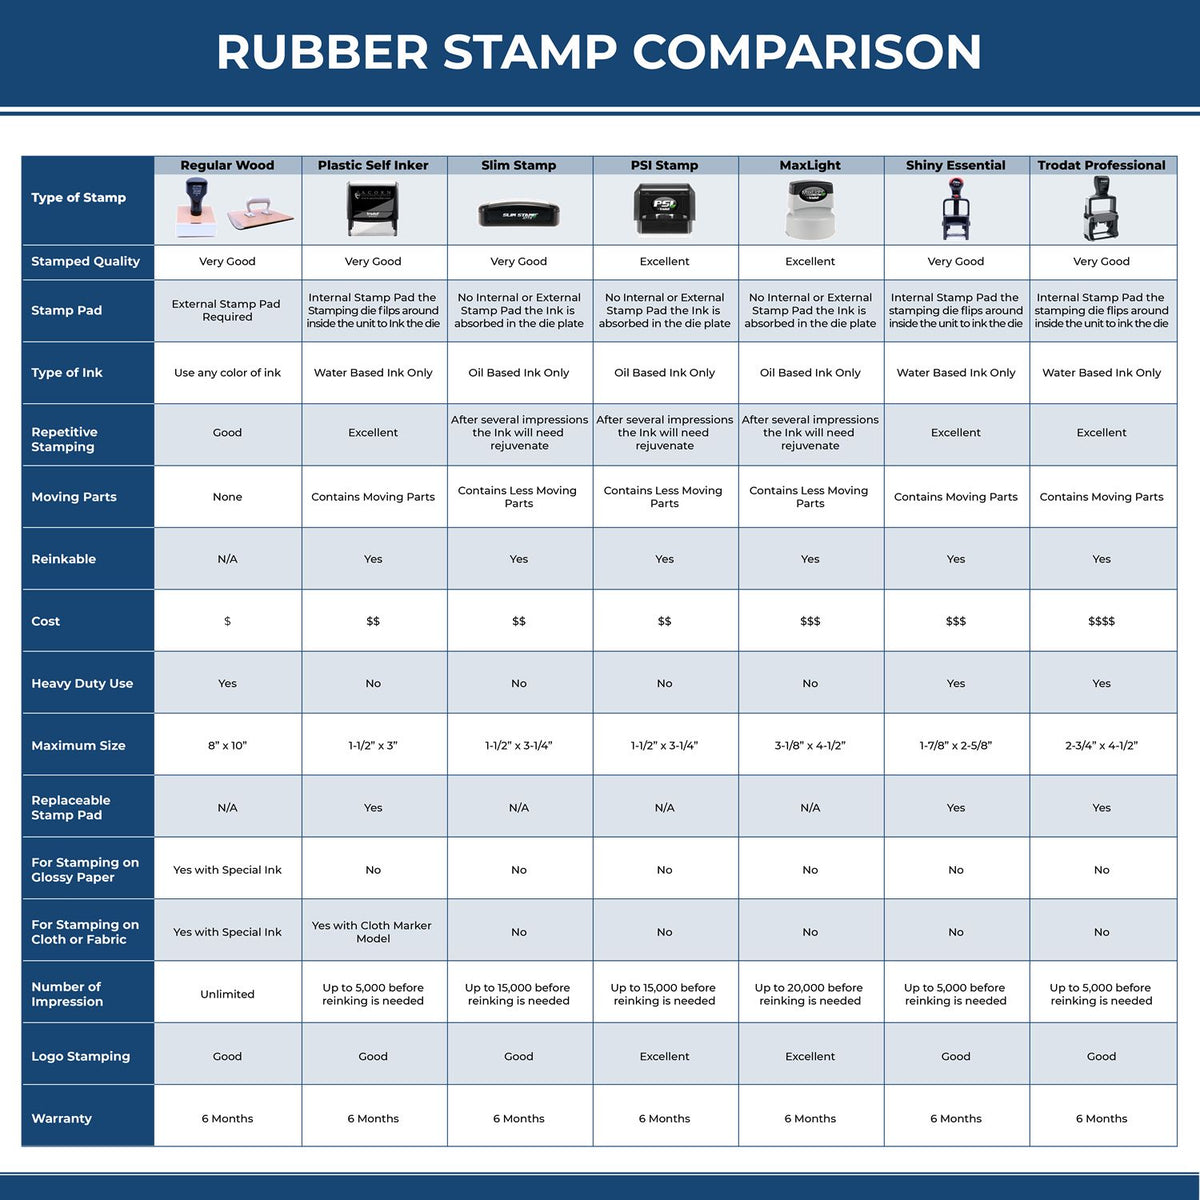 A comparison chart for the different types of mount models available for the Wooden Handle Rhode Island Rectangular Notary Public Stamp.